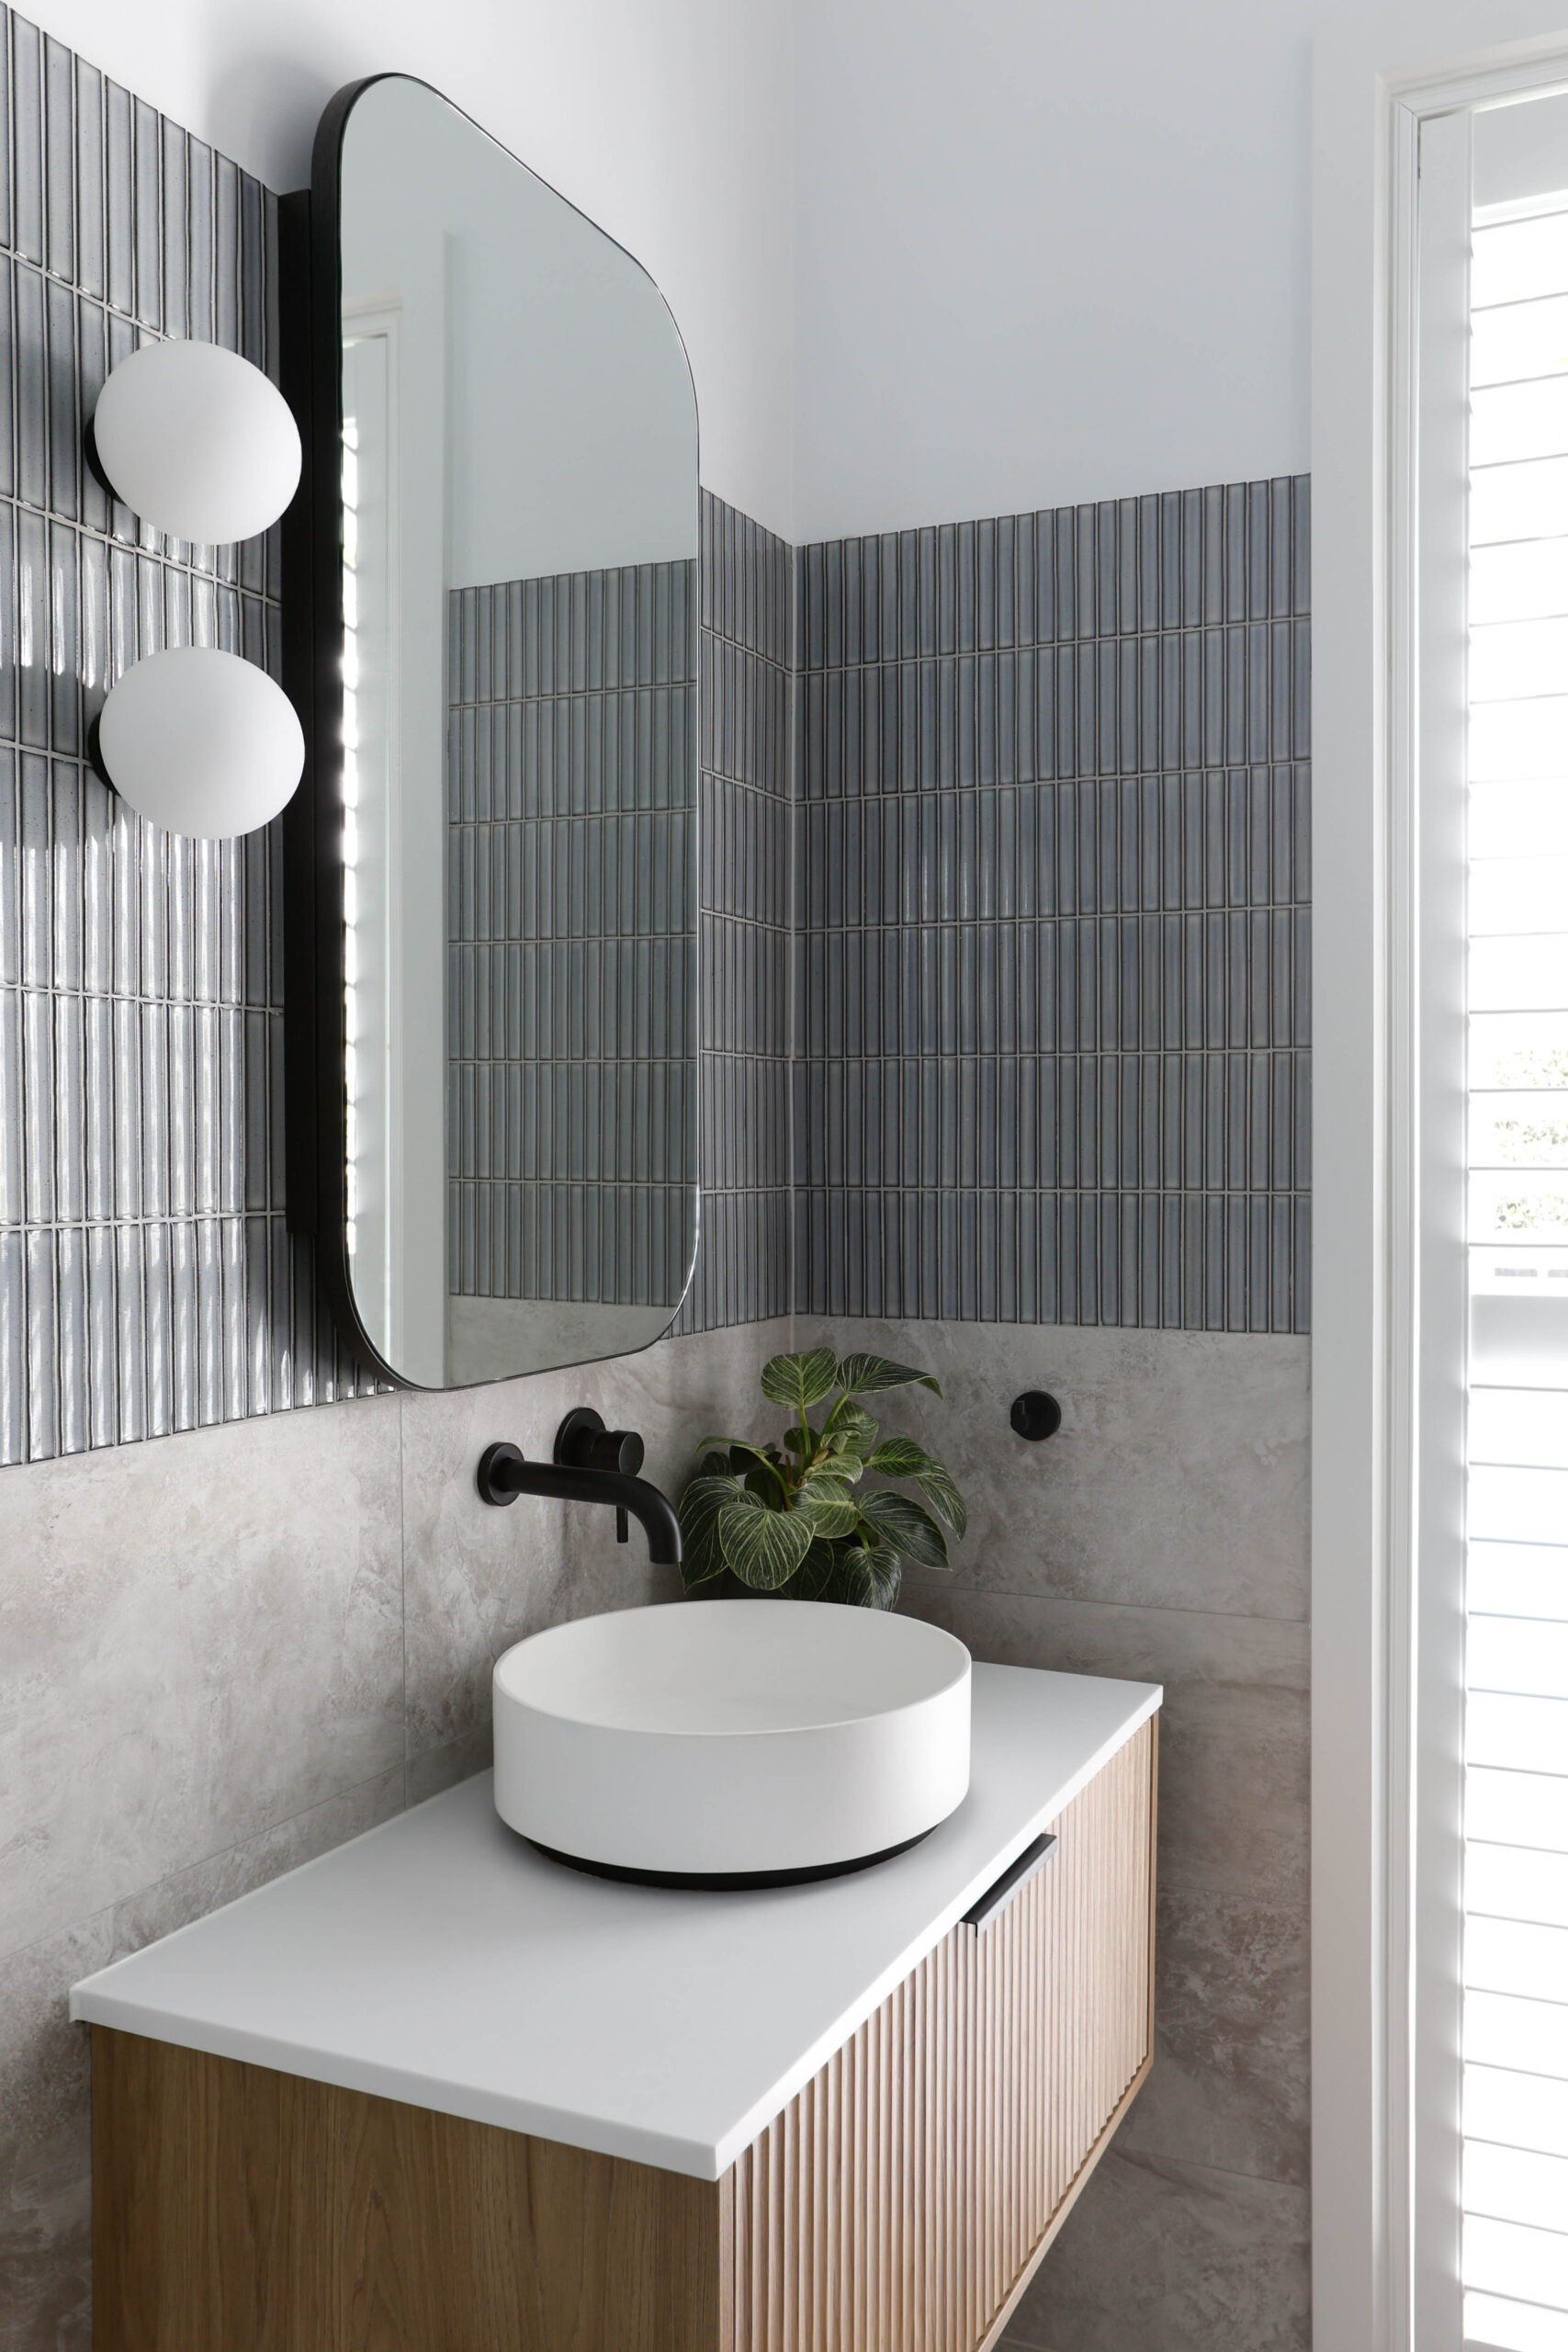 Yarraville ensuite with fluted timber vanity unit, kit kat tiles, oval mirror cabinet and round ball wall lights